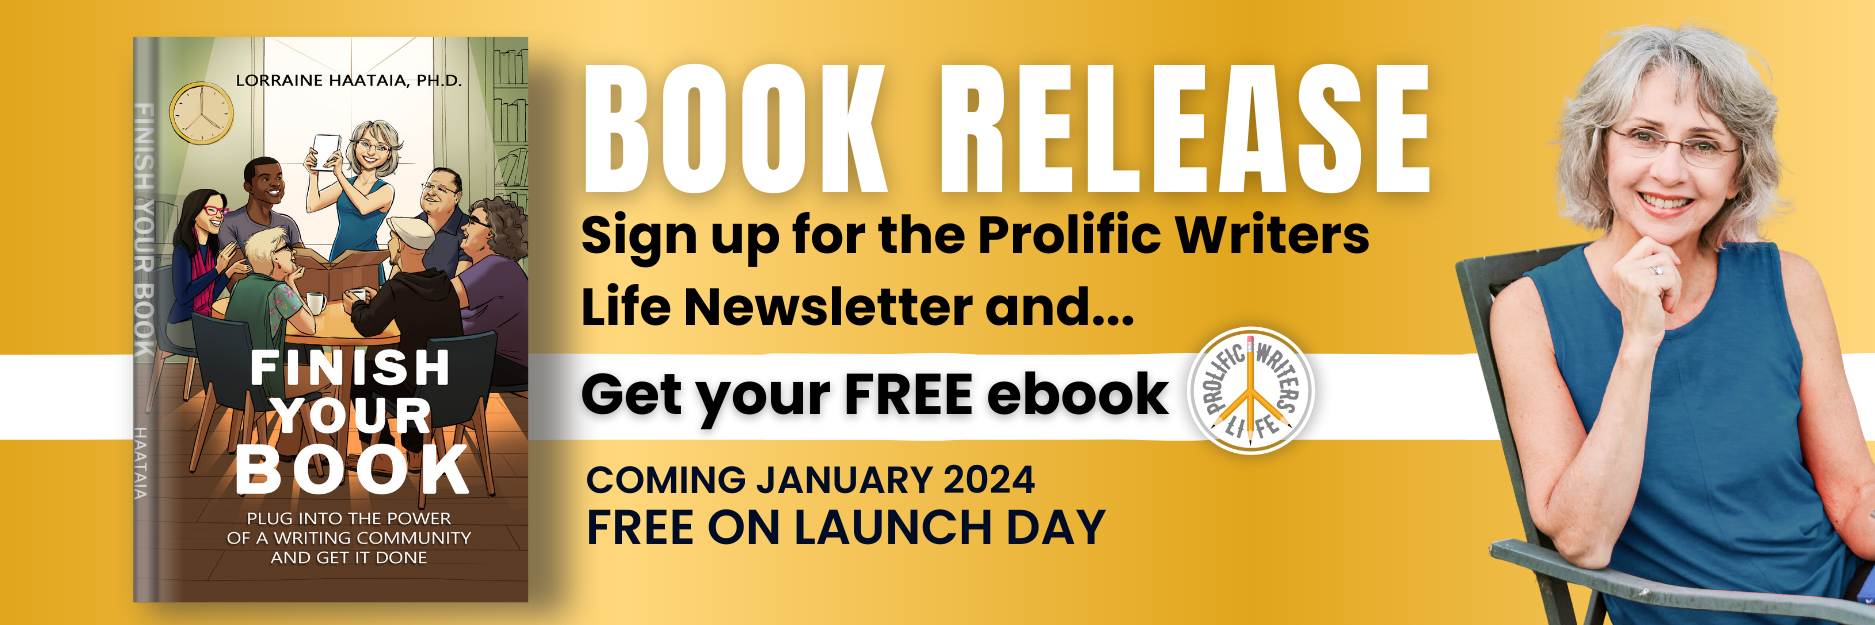 Finish Your Book by Lorraine Haataia - Book Release coming January 2024 - Free on Launch Day